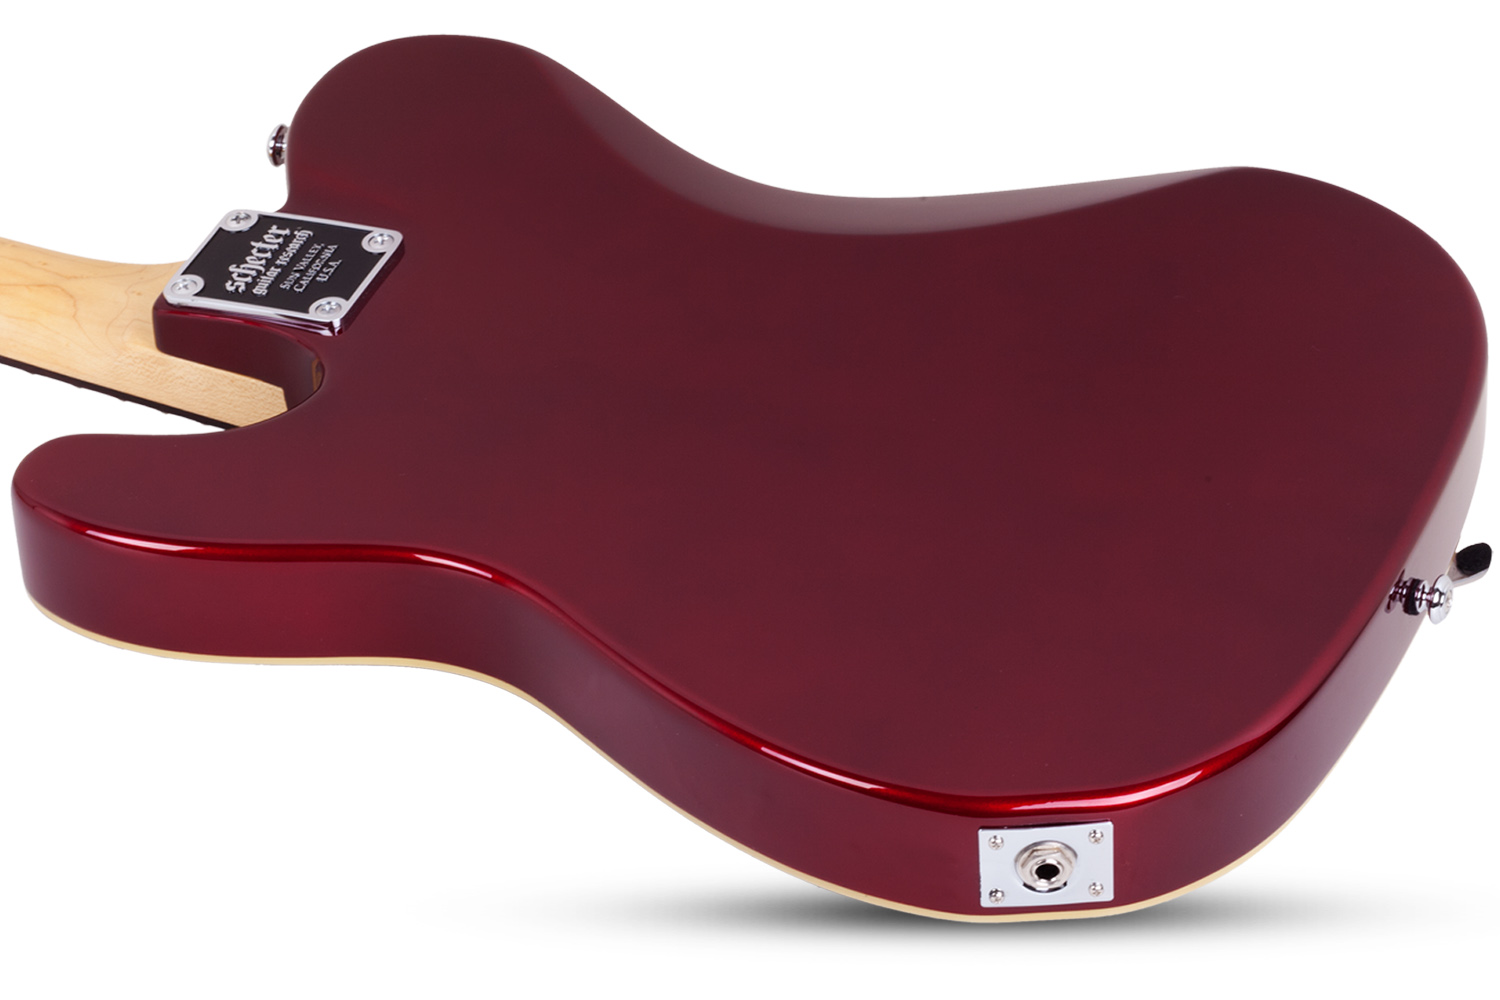 Schecter Pt Fastback Ii B Bigsby 2h Trem Bigsby Rw - Metallic Red - Guitare Électrique Forme Tel - Variation 3